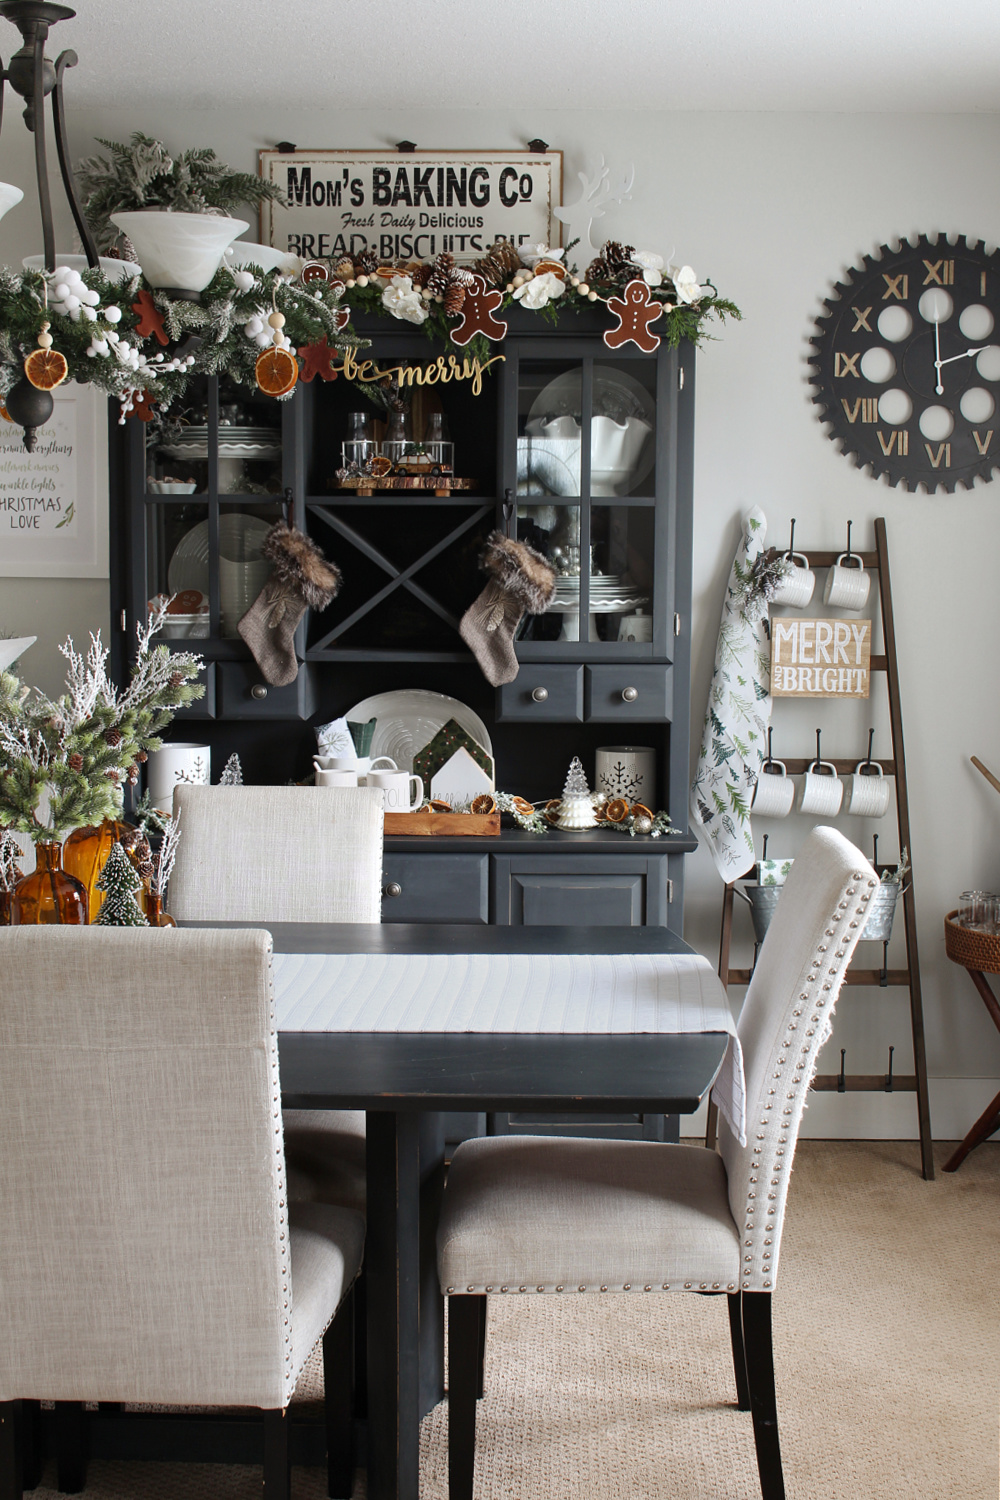 Beautiful dining room decorated for Christmas in green and white.